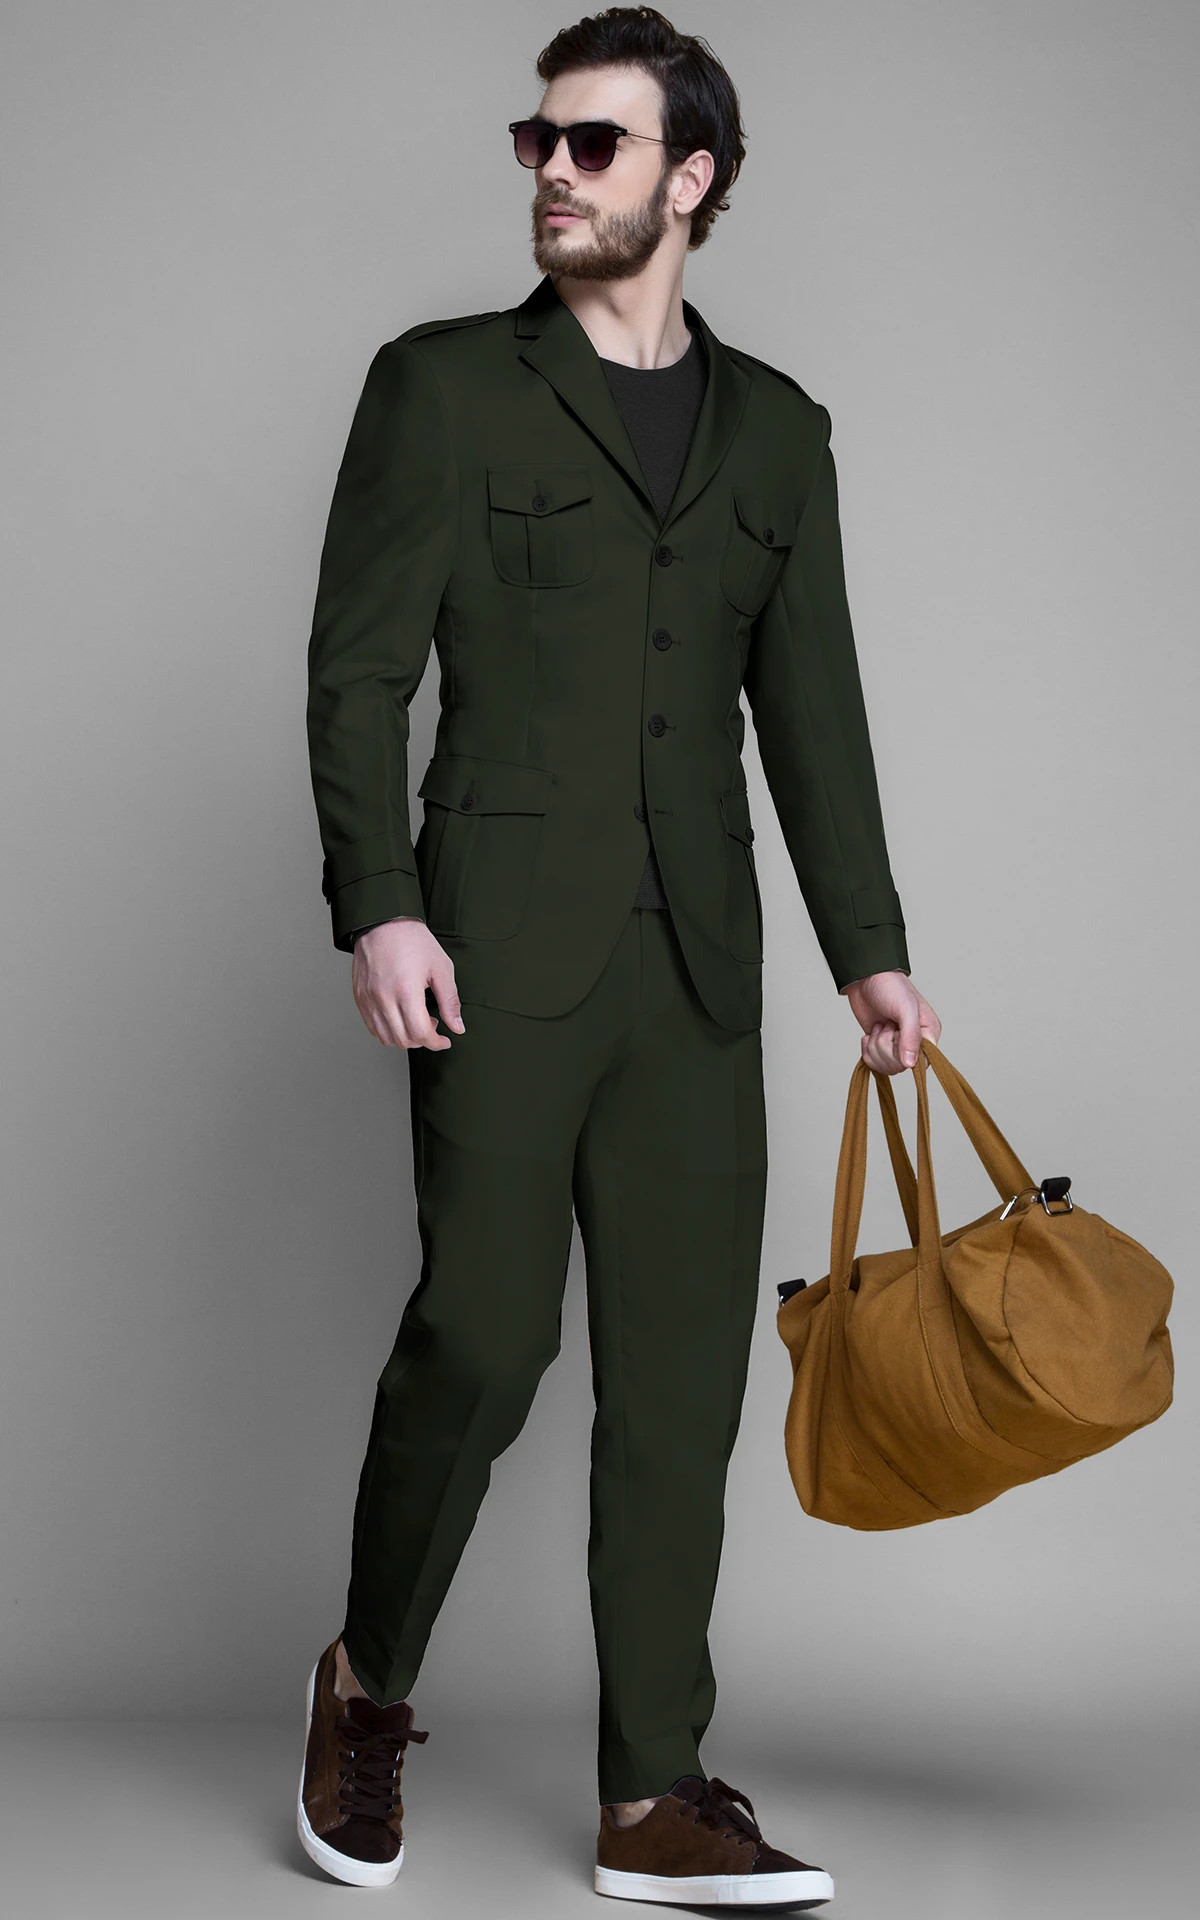 Men's Wool 3 Piece Suit Tweed Olive Green | TruClothing